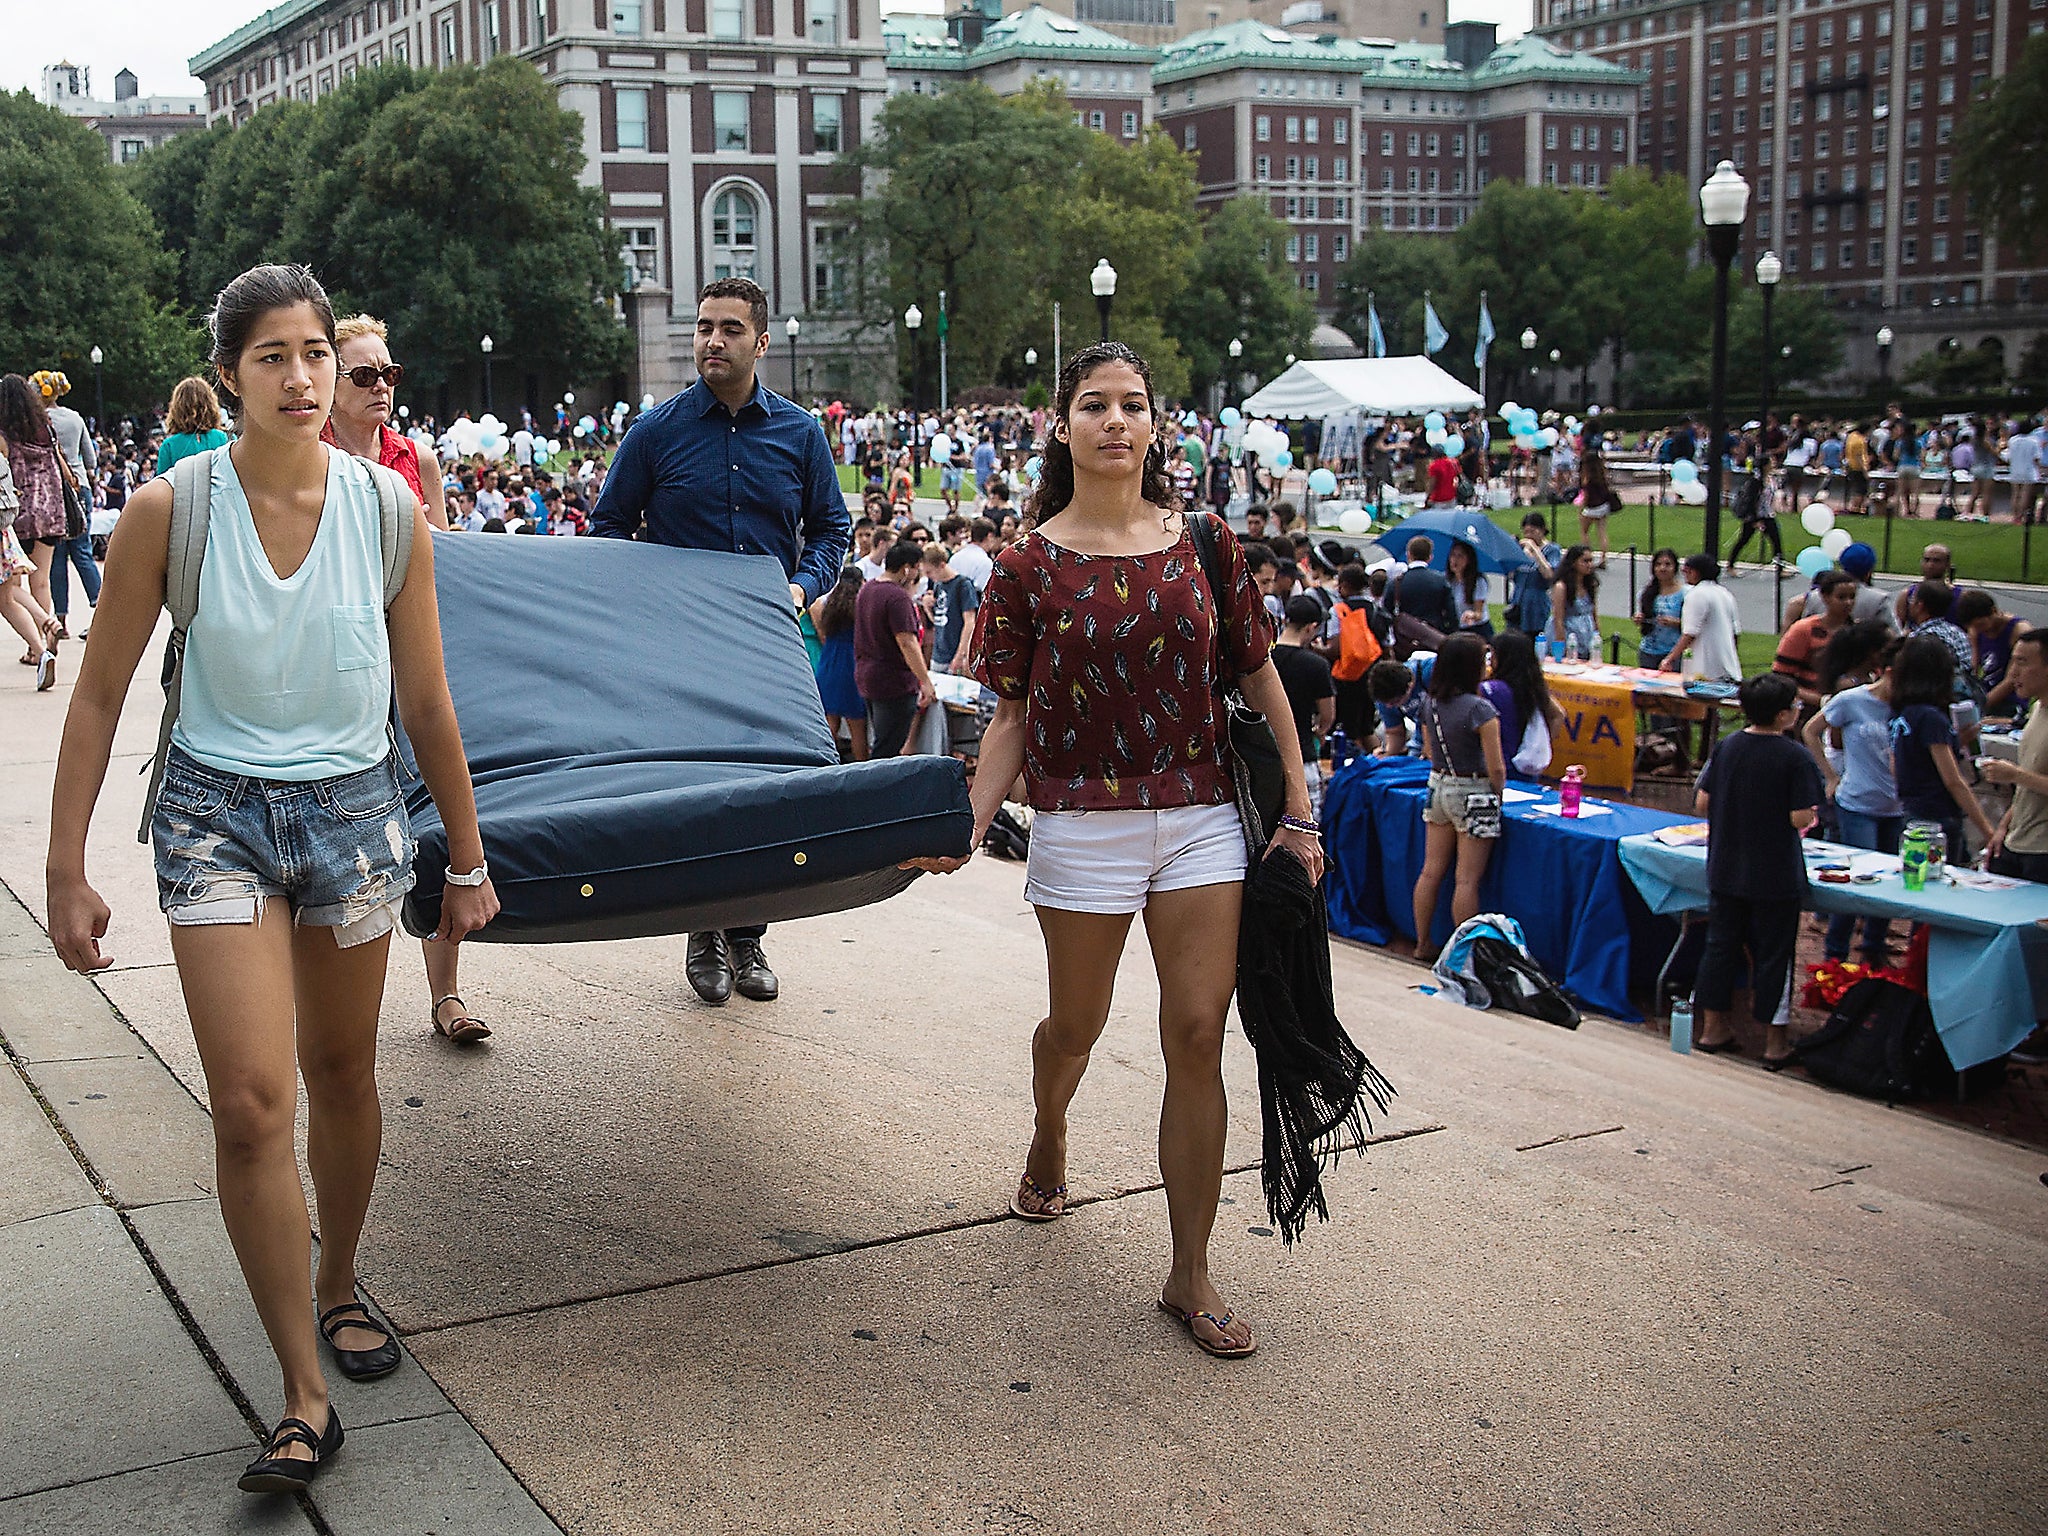 Emma Sulkowicz (left), a student at Columbia University, carries a mattress in protest of the university’s lack of action after she reported being raped (Getty)